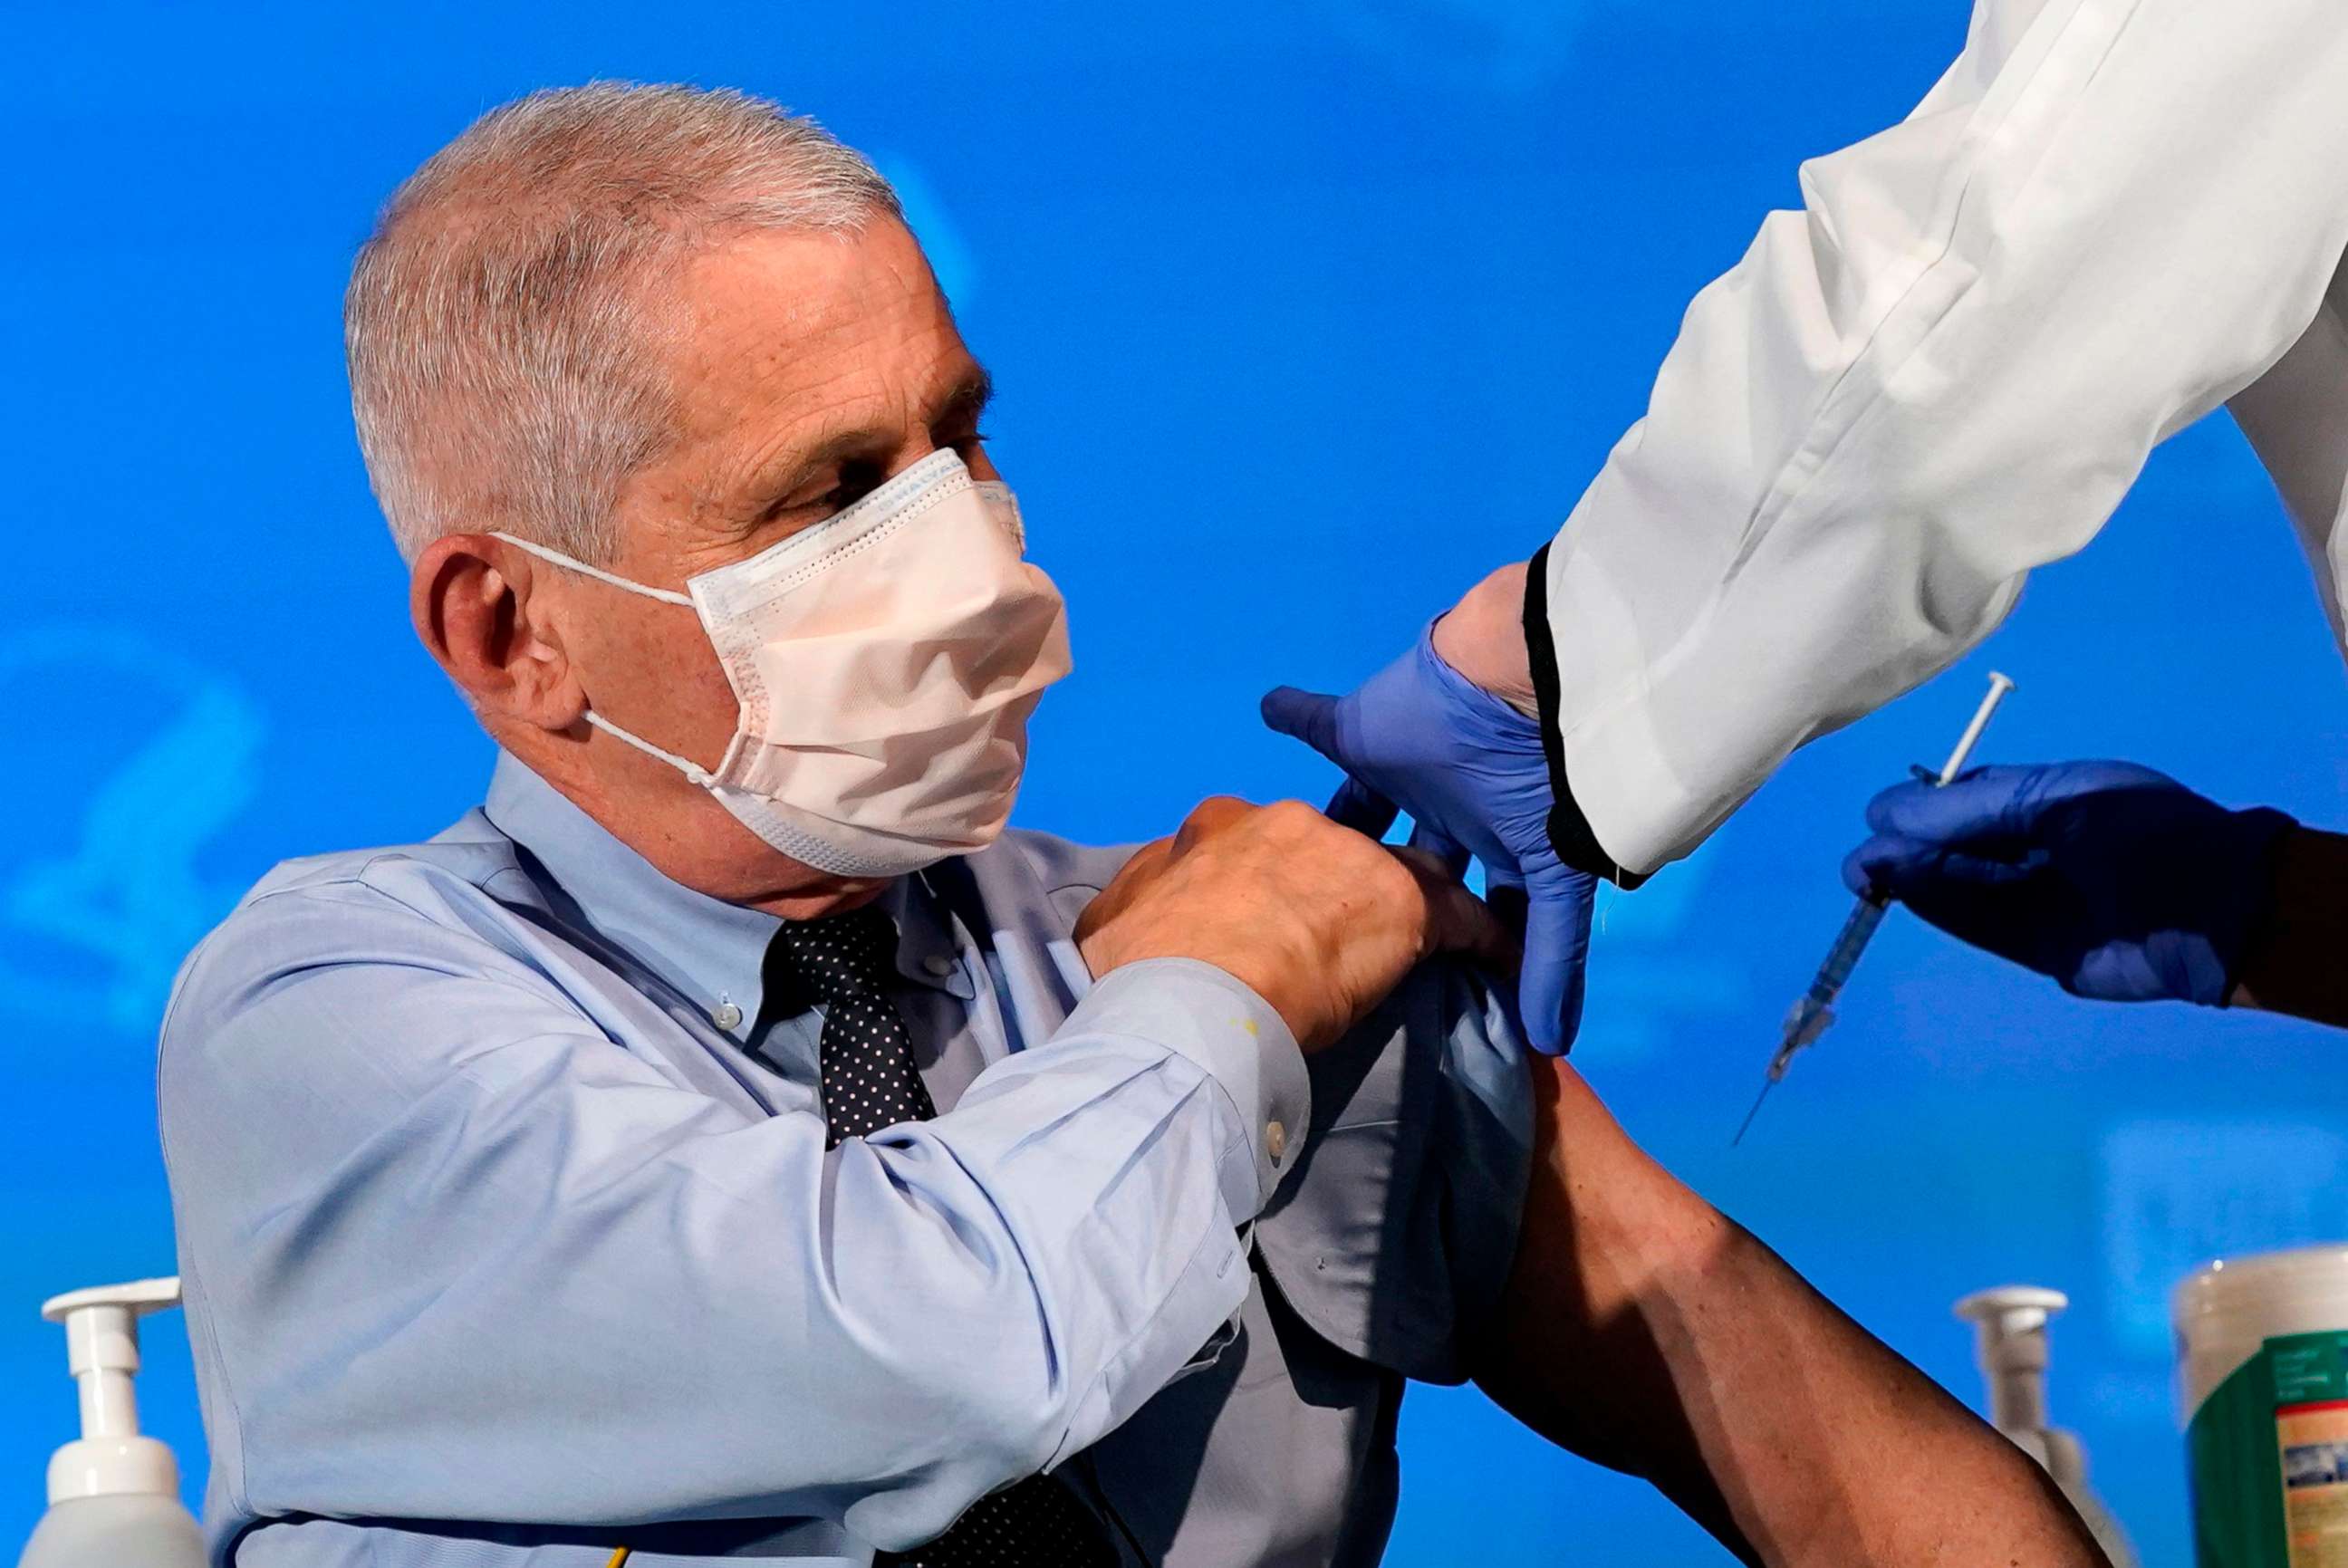 PHOTO: Anthony Fauci, director of the National Institute of Allergy and Infectious Diseases, prepares to receive his first dose of the Covid-19 vaccine at the National Institutes of Health, Dec. 22, 2020, in Bethesda, Maryland.